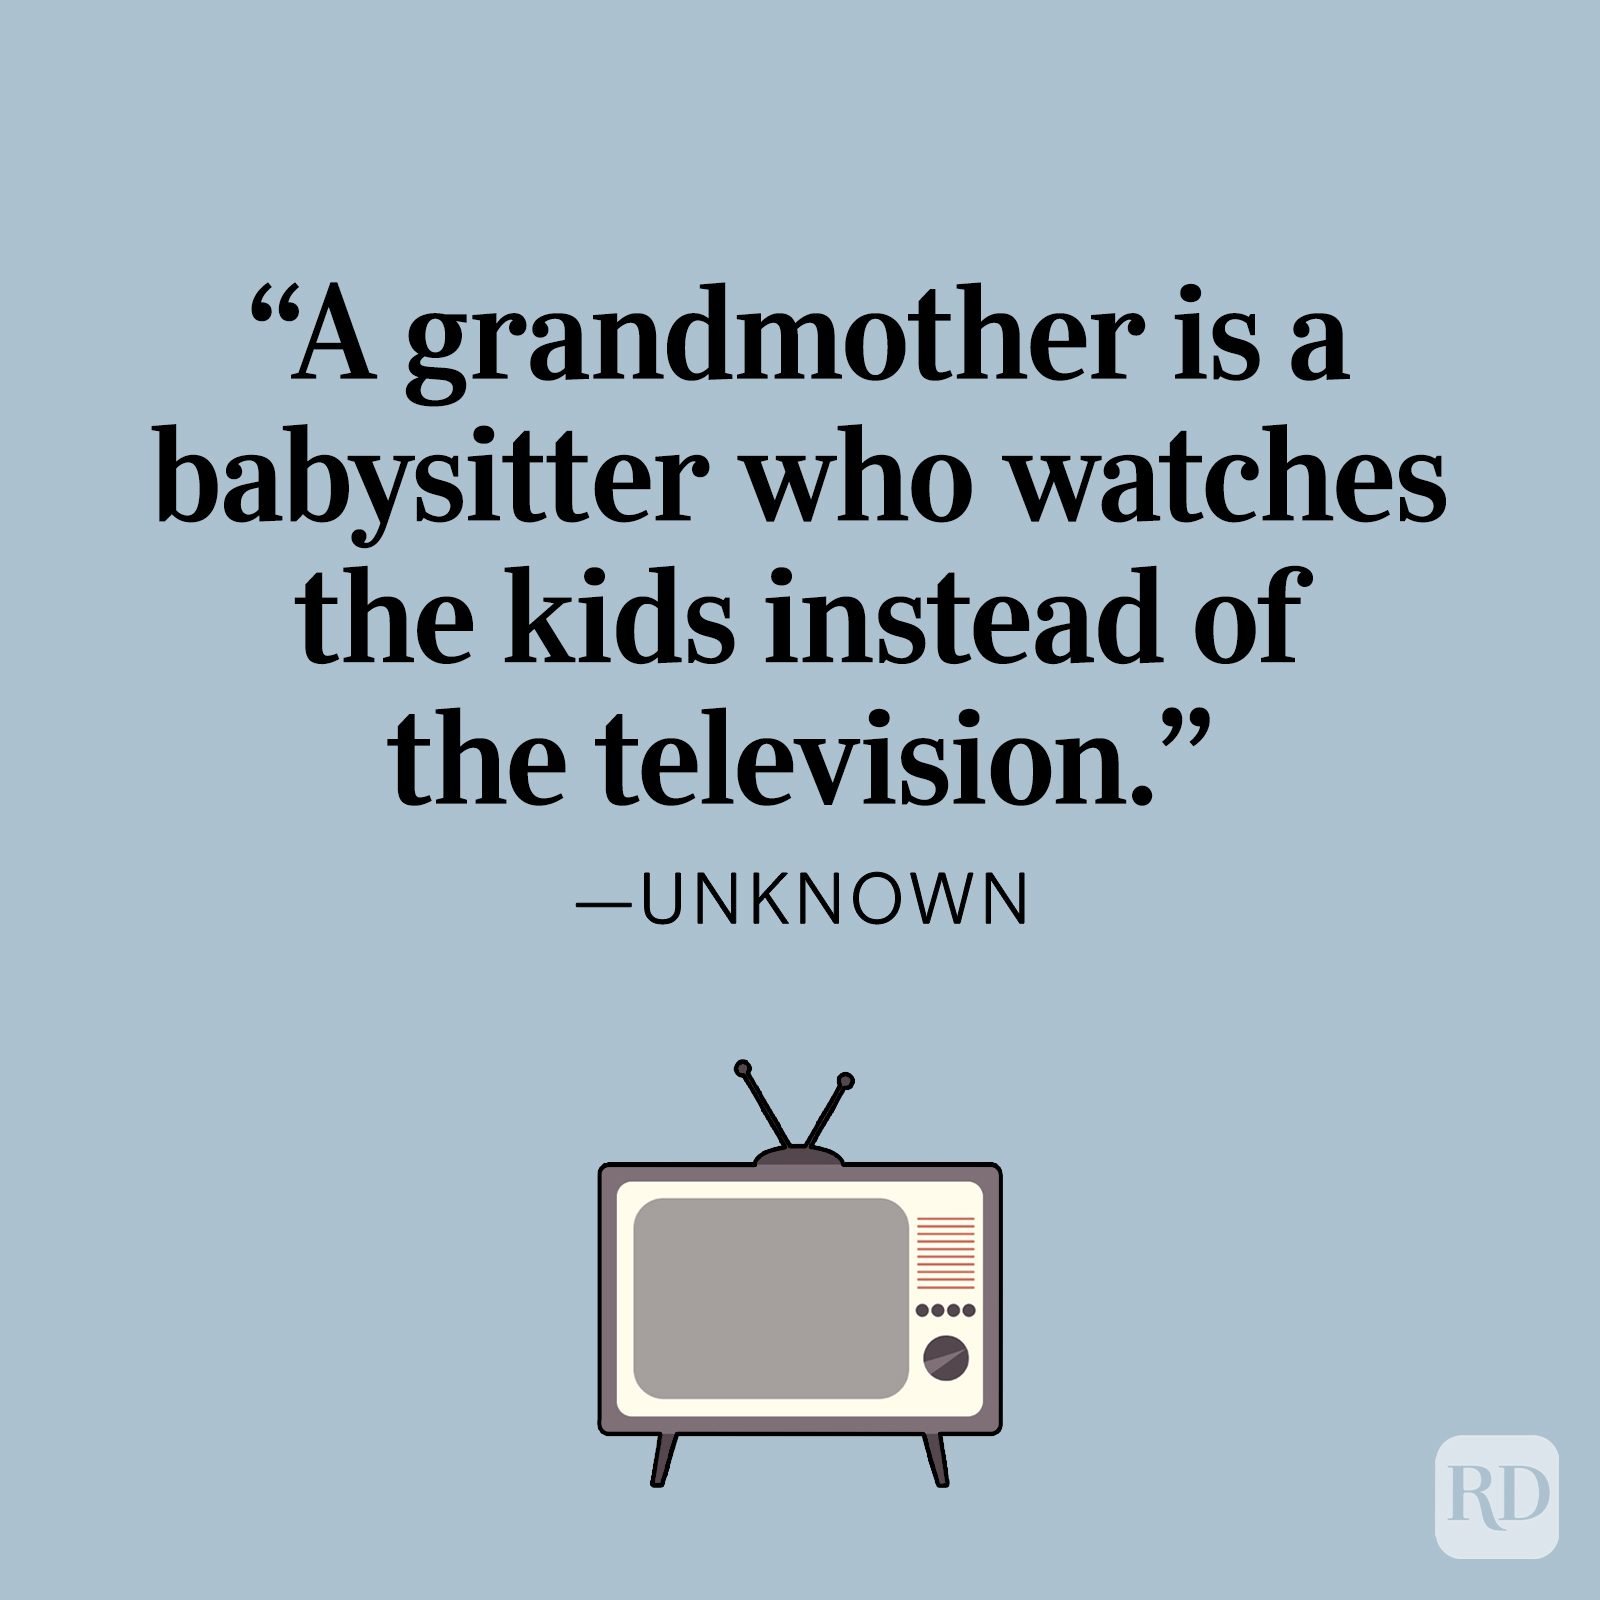 40 Best Grandma Quotes to Share With Grammy in 2022